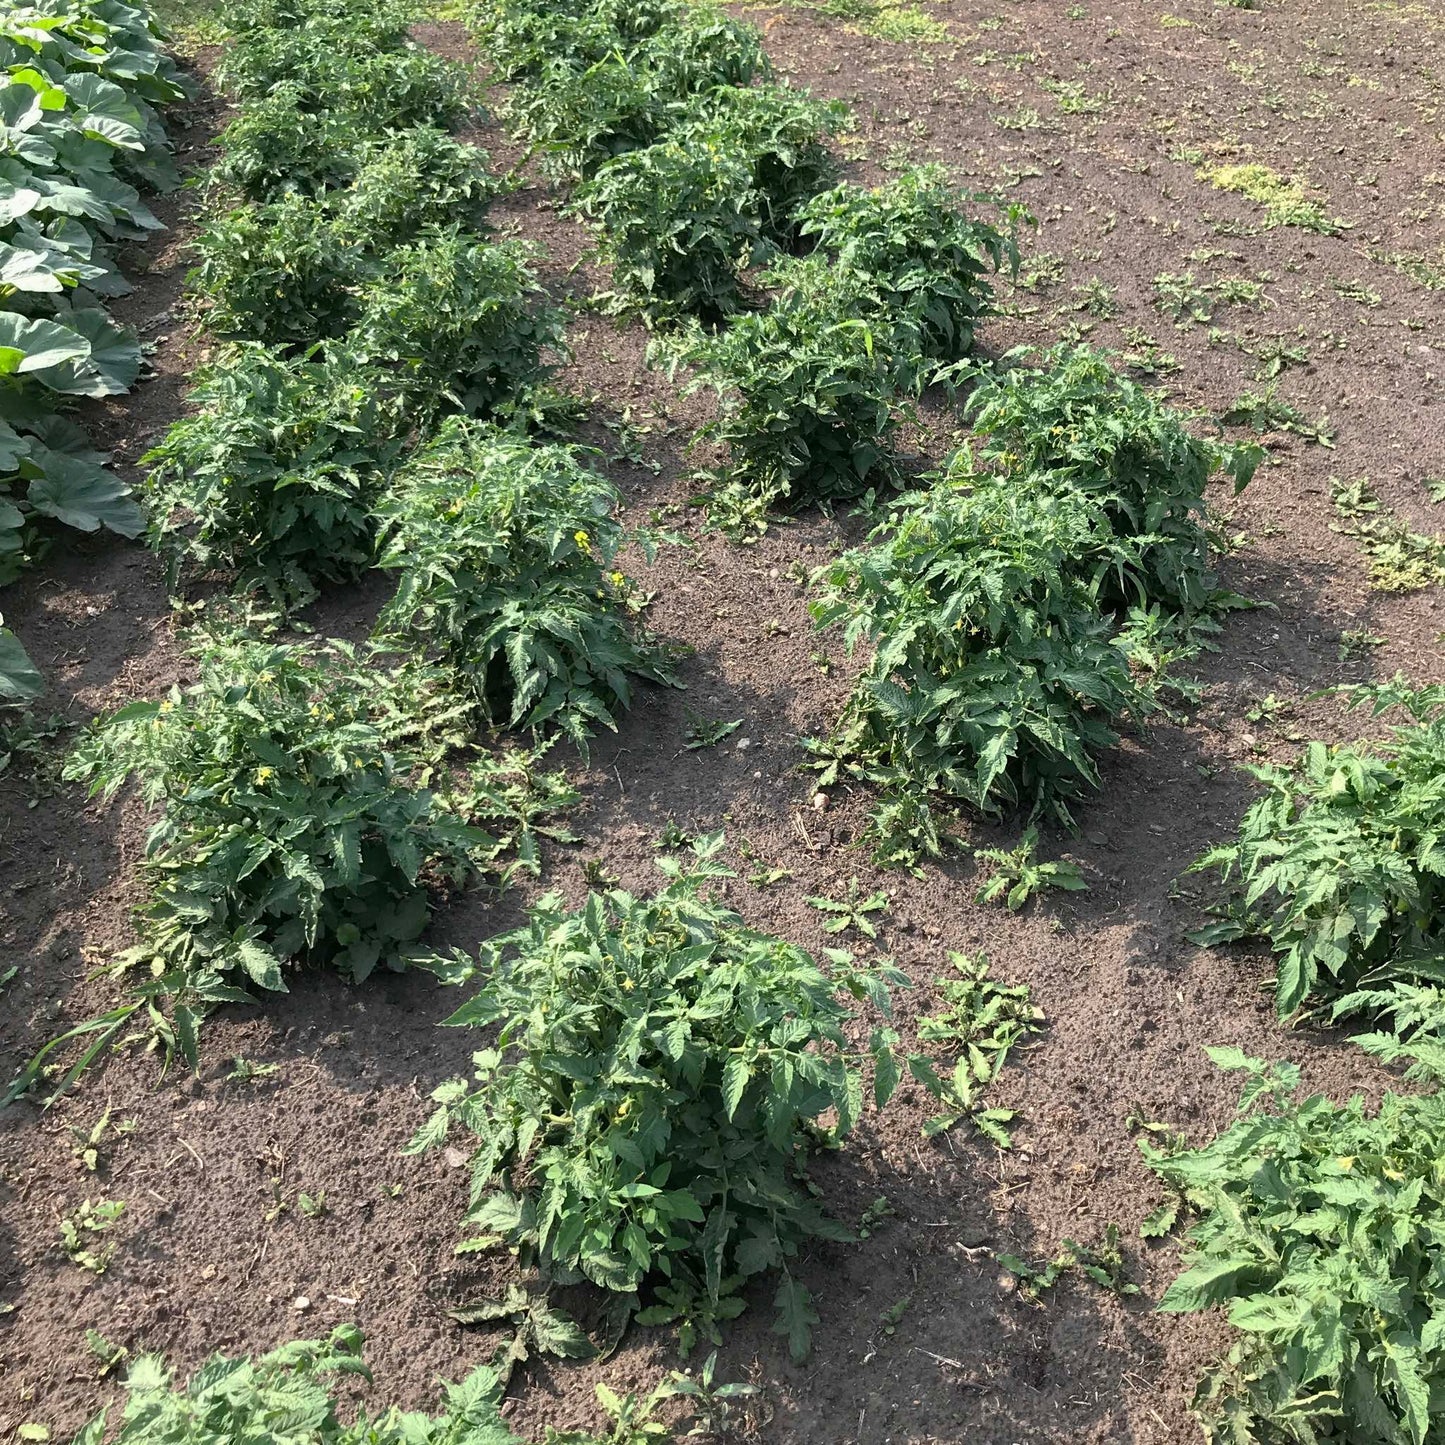 Four staggered rows of dwarf tomato plants.